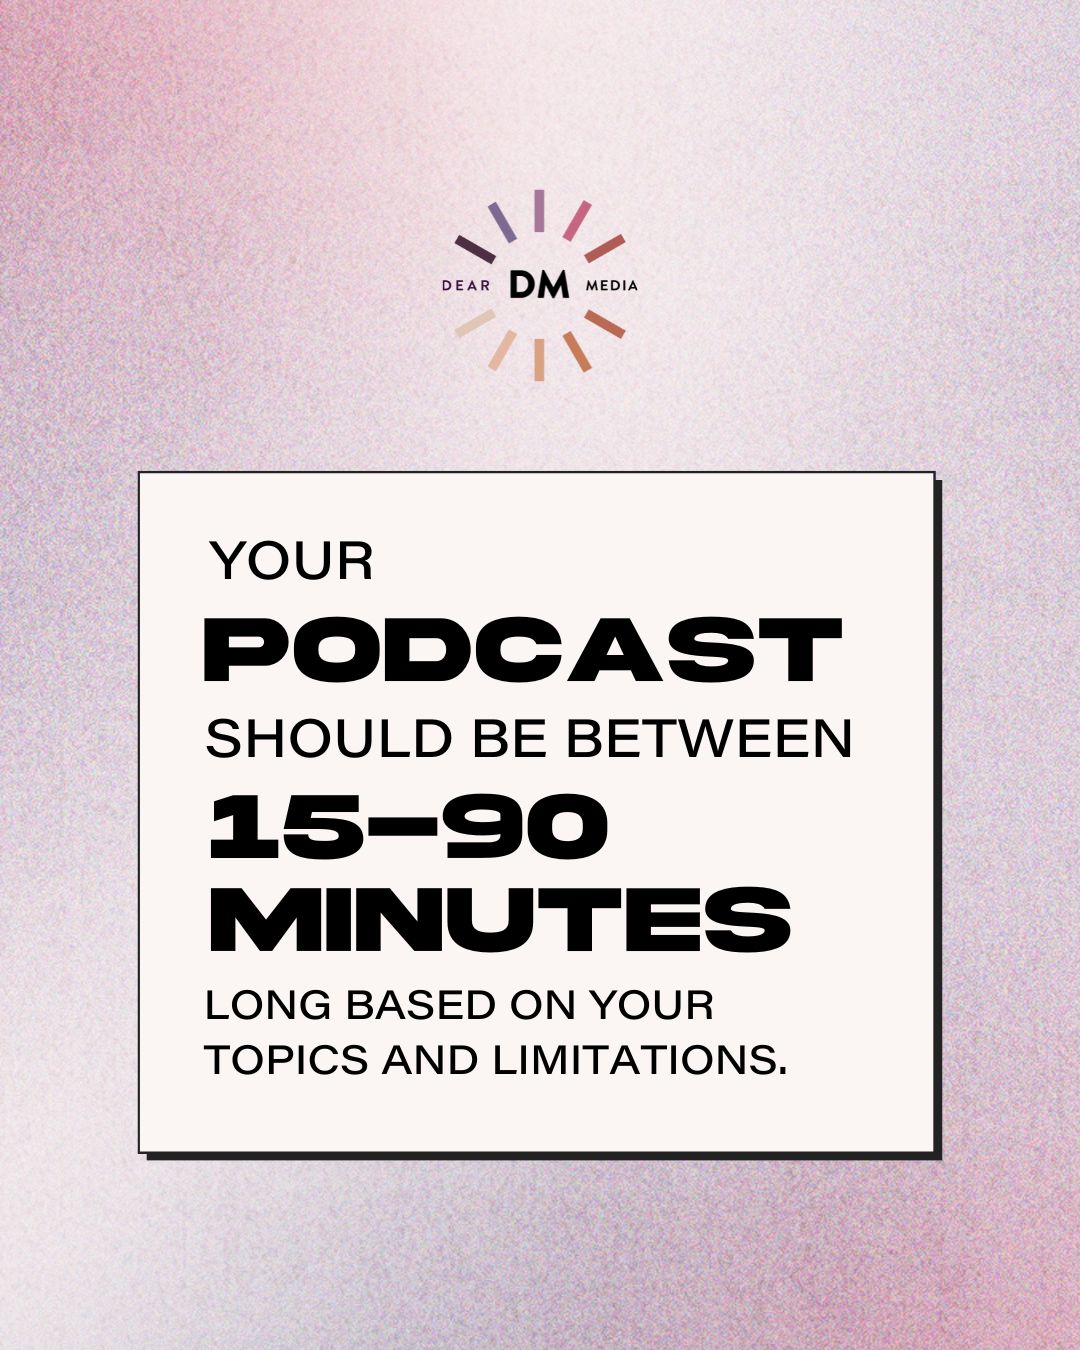 Your podcast should be between 15-90 minutes long based on your topics and limitations. 